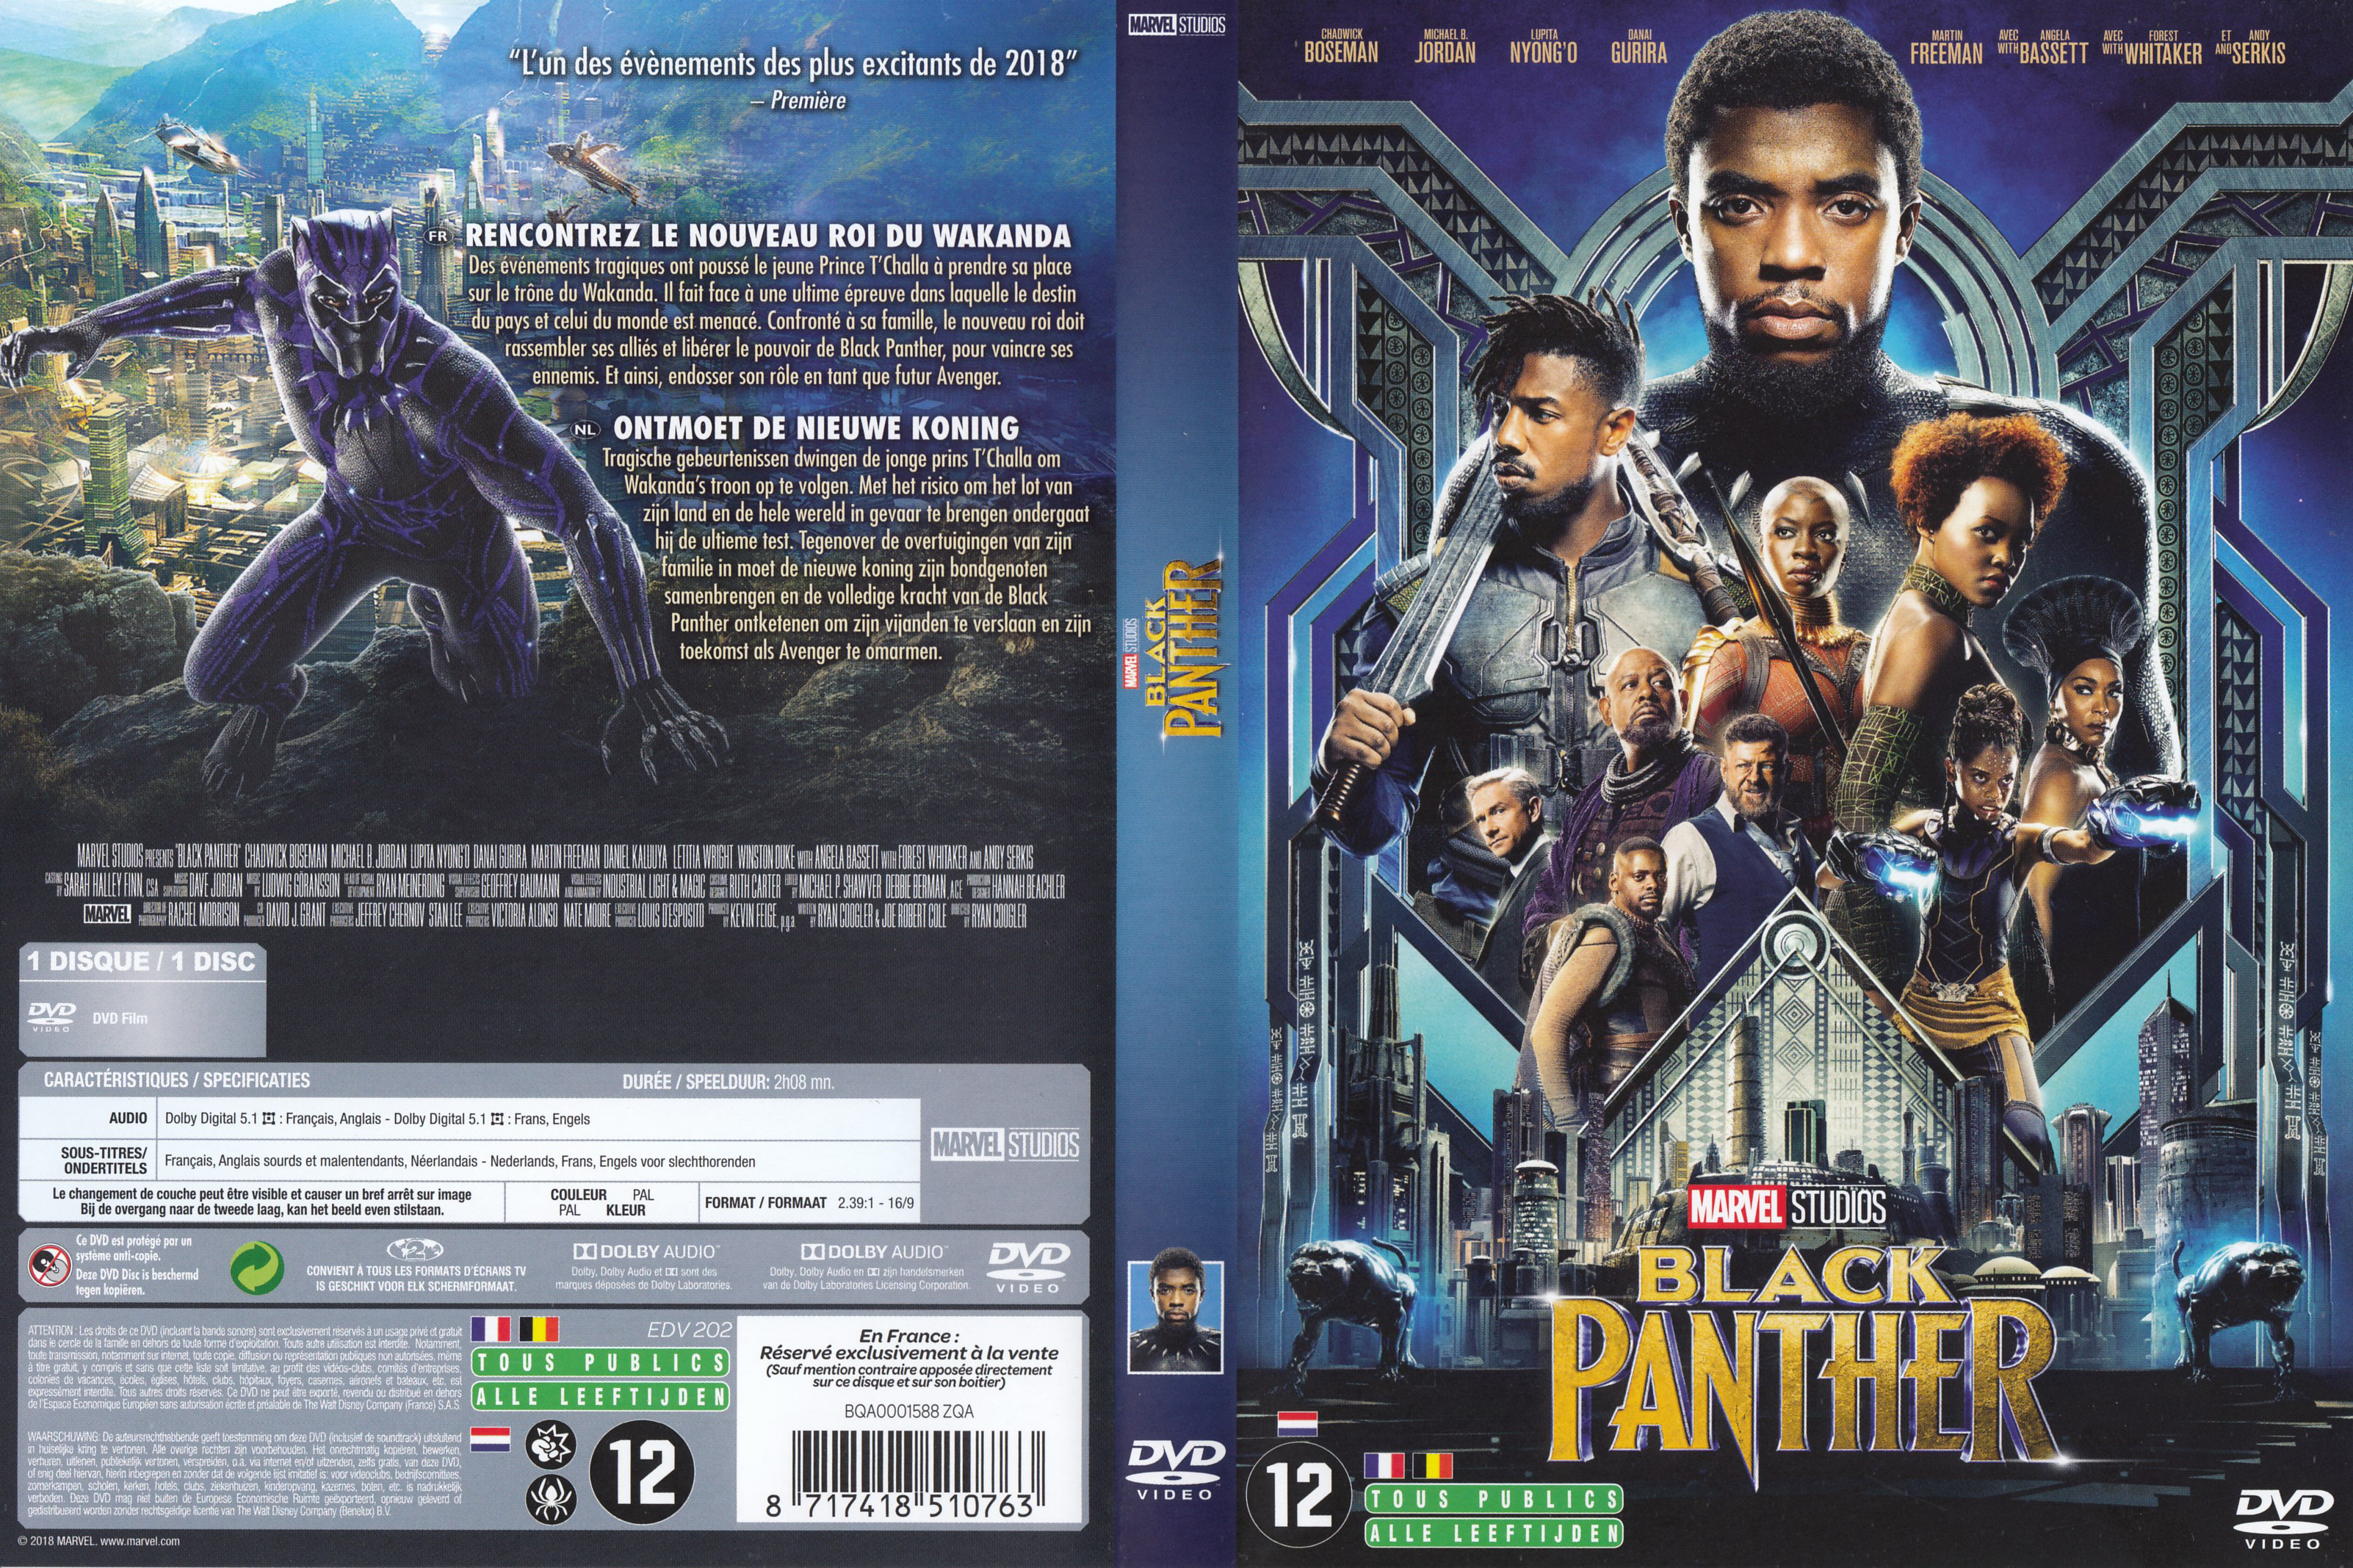 Jaquette DVD Black panther